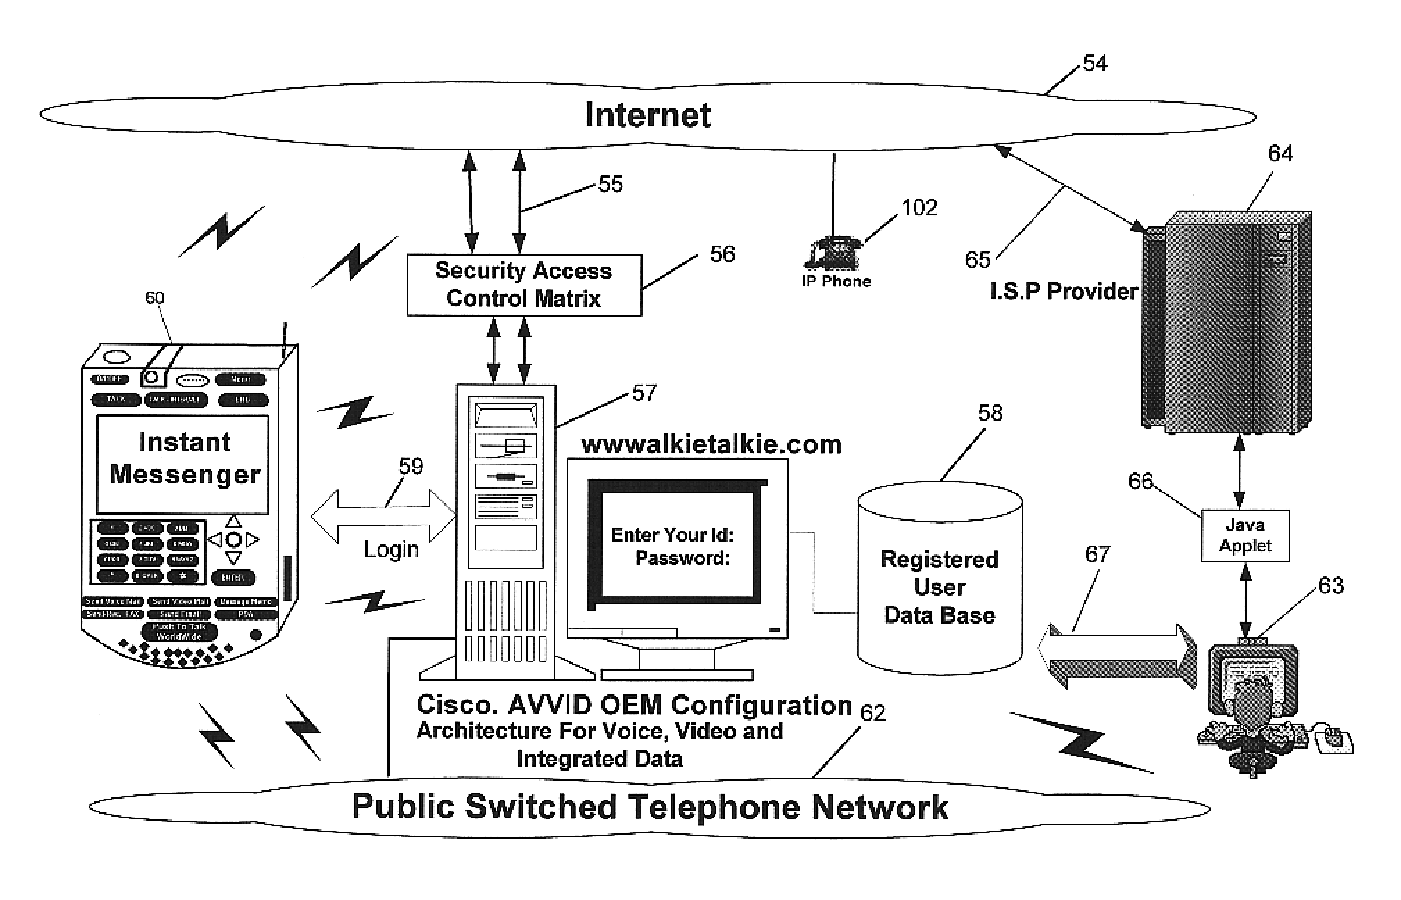 Multifunctional world wide walkie talkie, a tri-frequency cellular-satellite wireless instant messenger computer and network for establishing global wireless volp quality of service (QOS) communications, unified messaging, and video conferencing via the internet